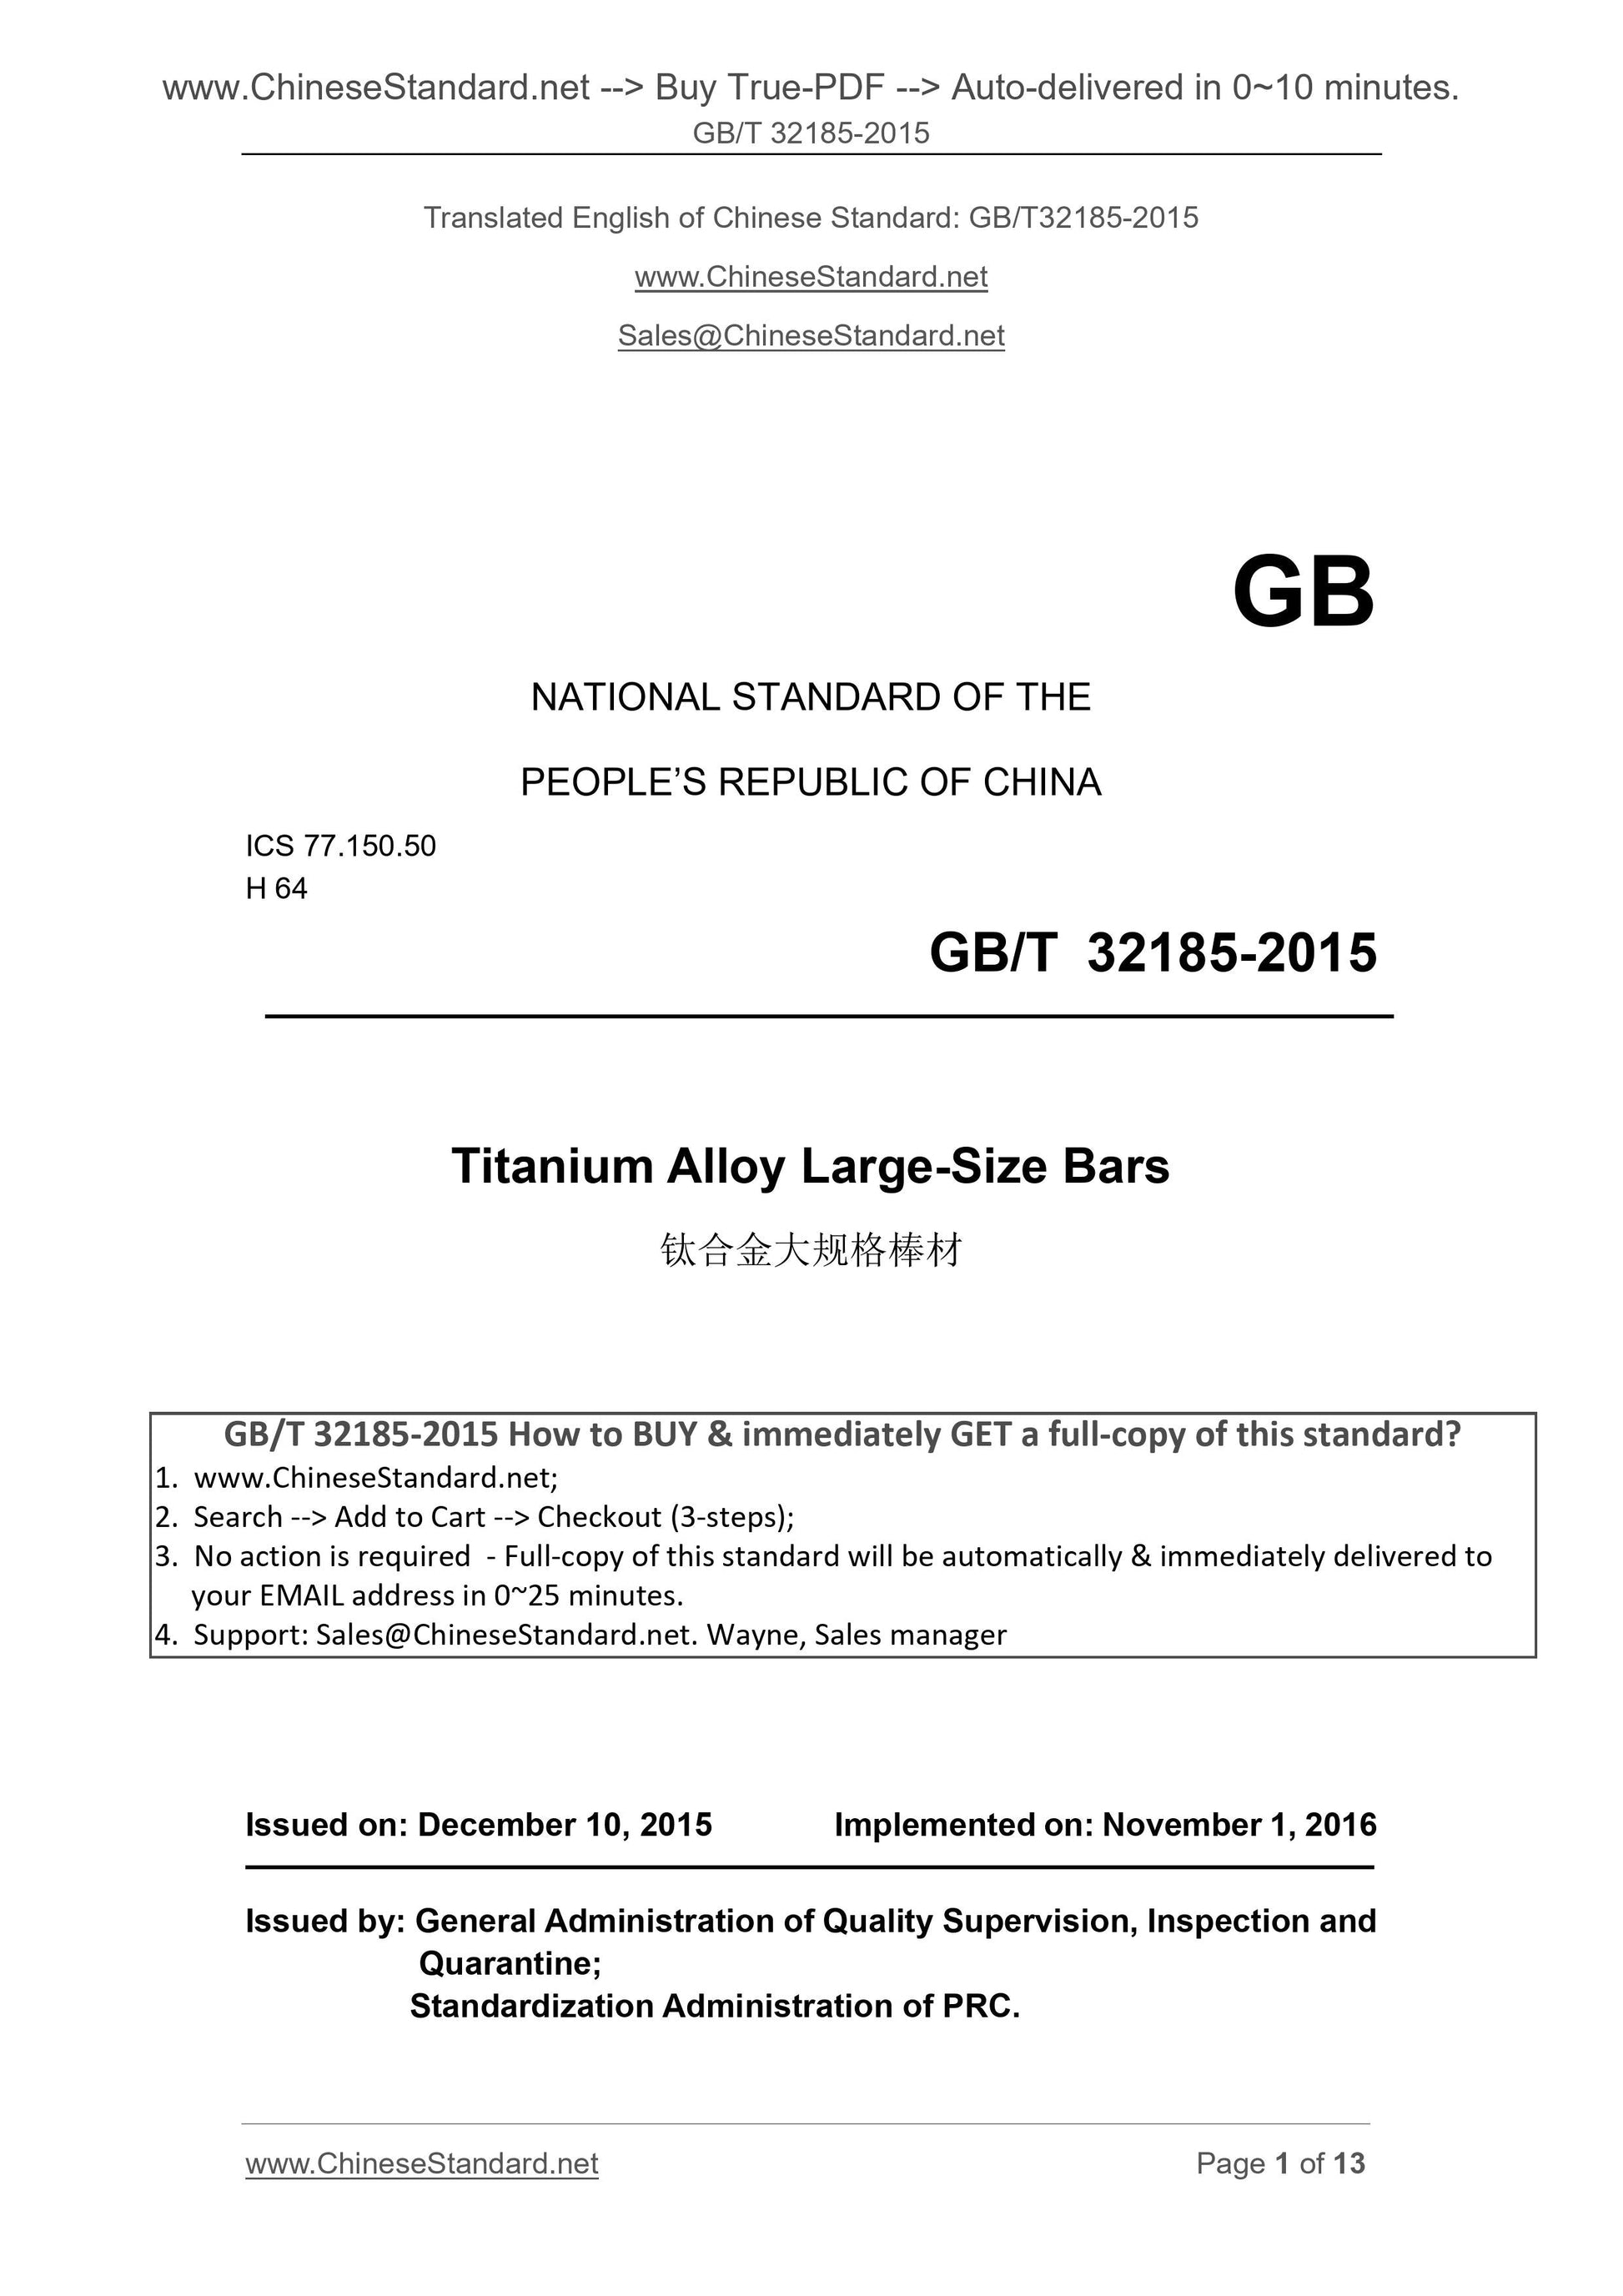 GB/T 32185-2015 Page 1